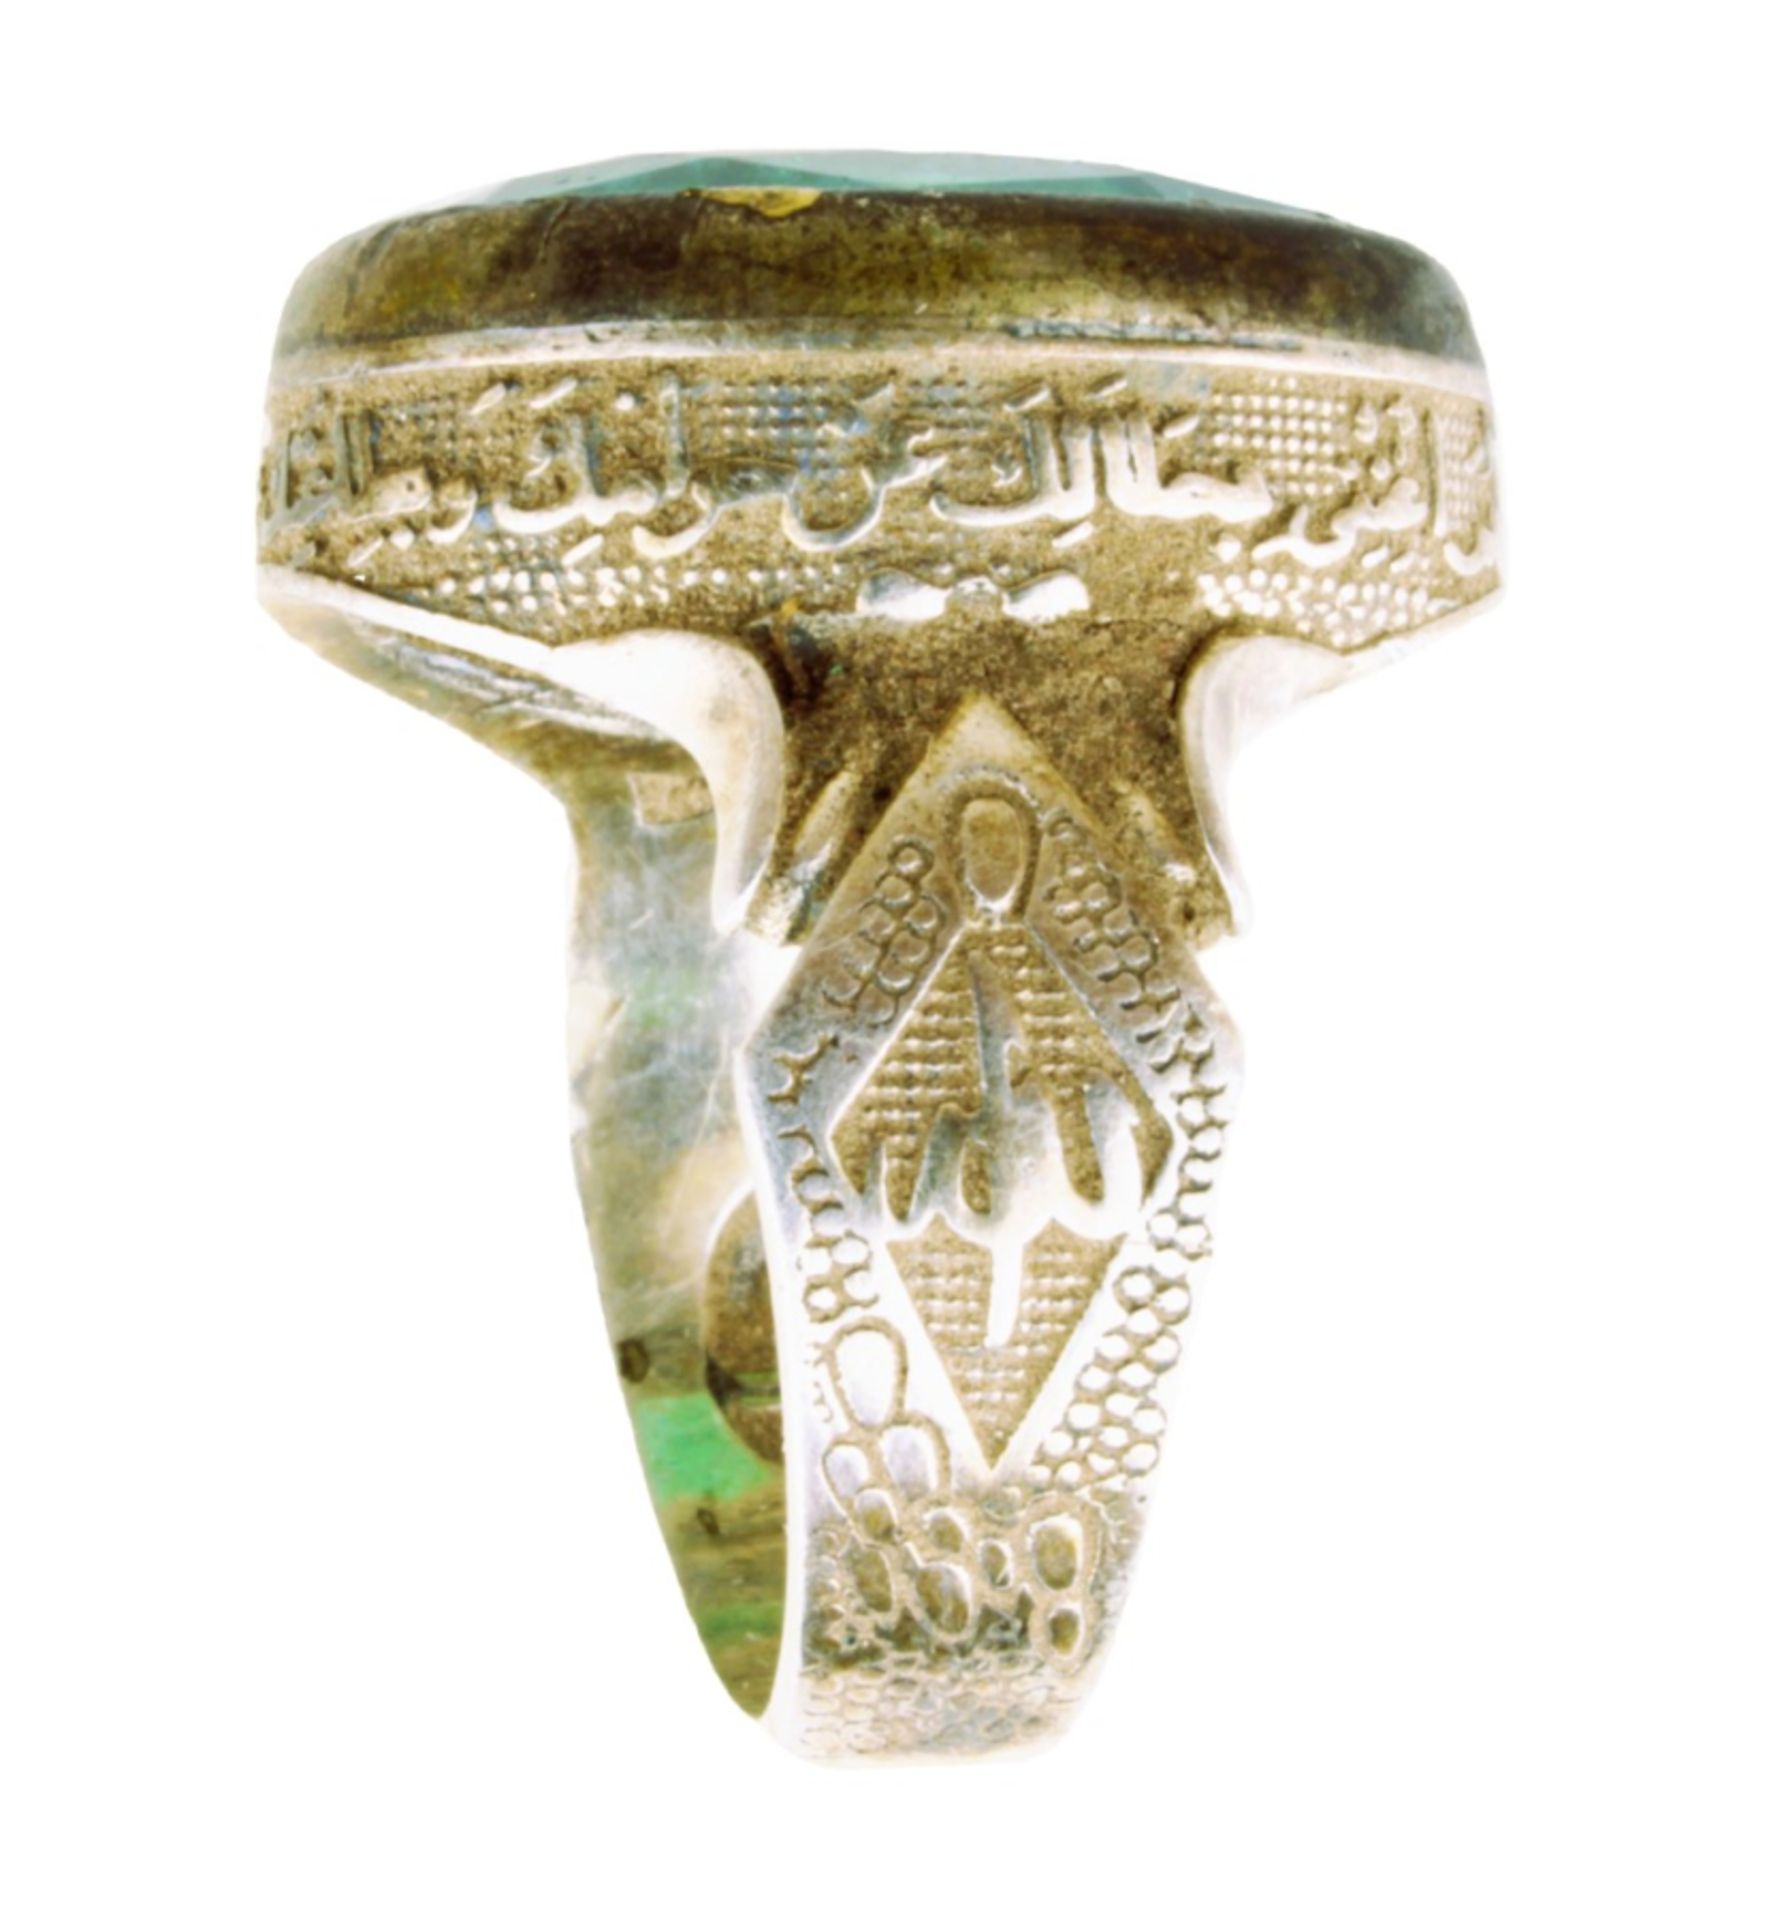 Silver ring with green stone engraved with islamic script - Image 7 of 7